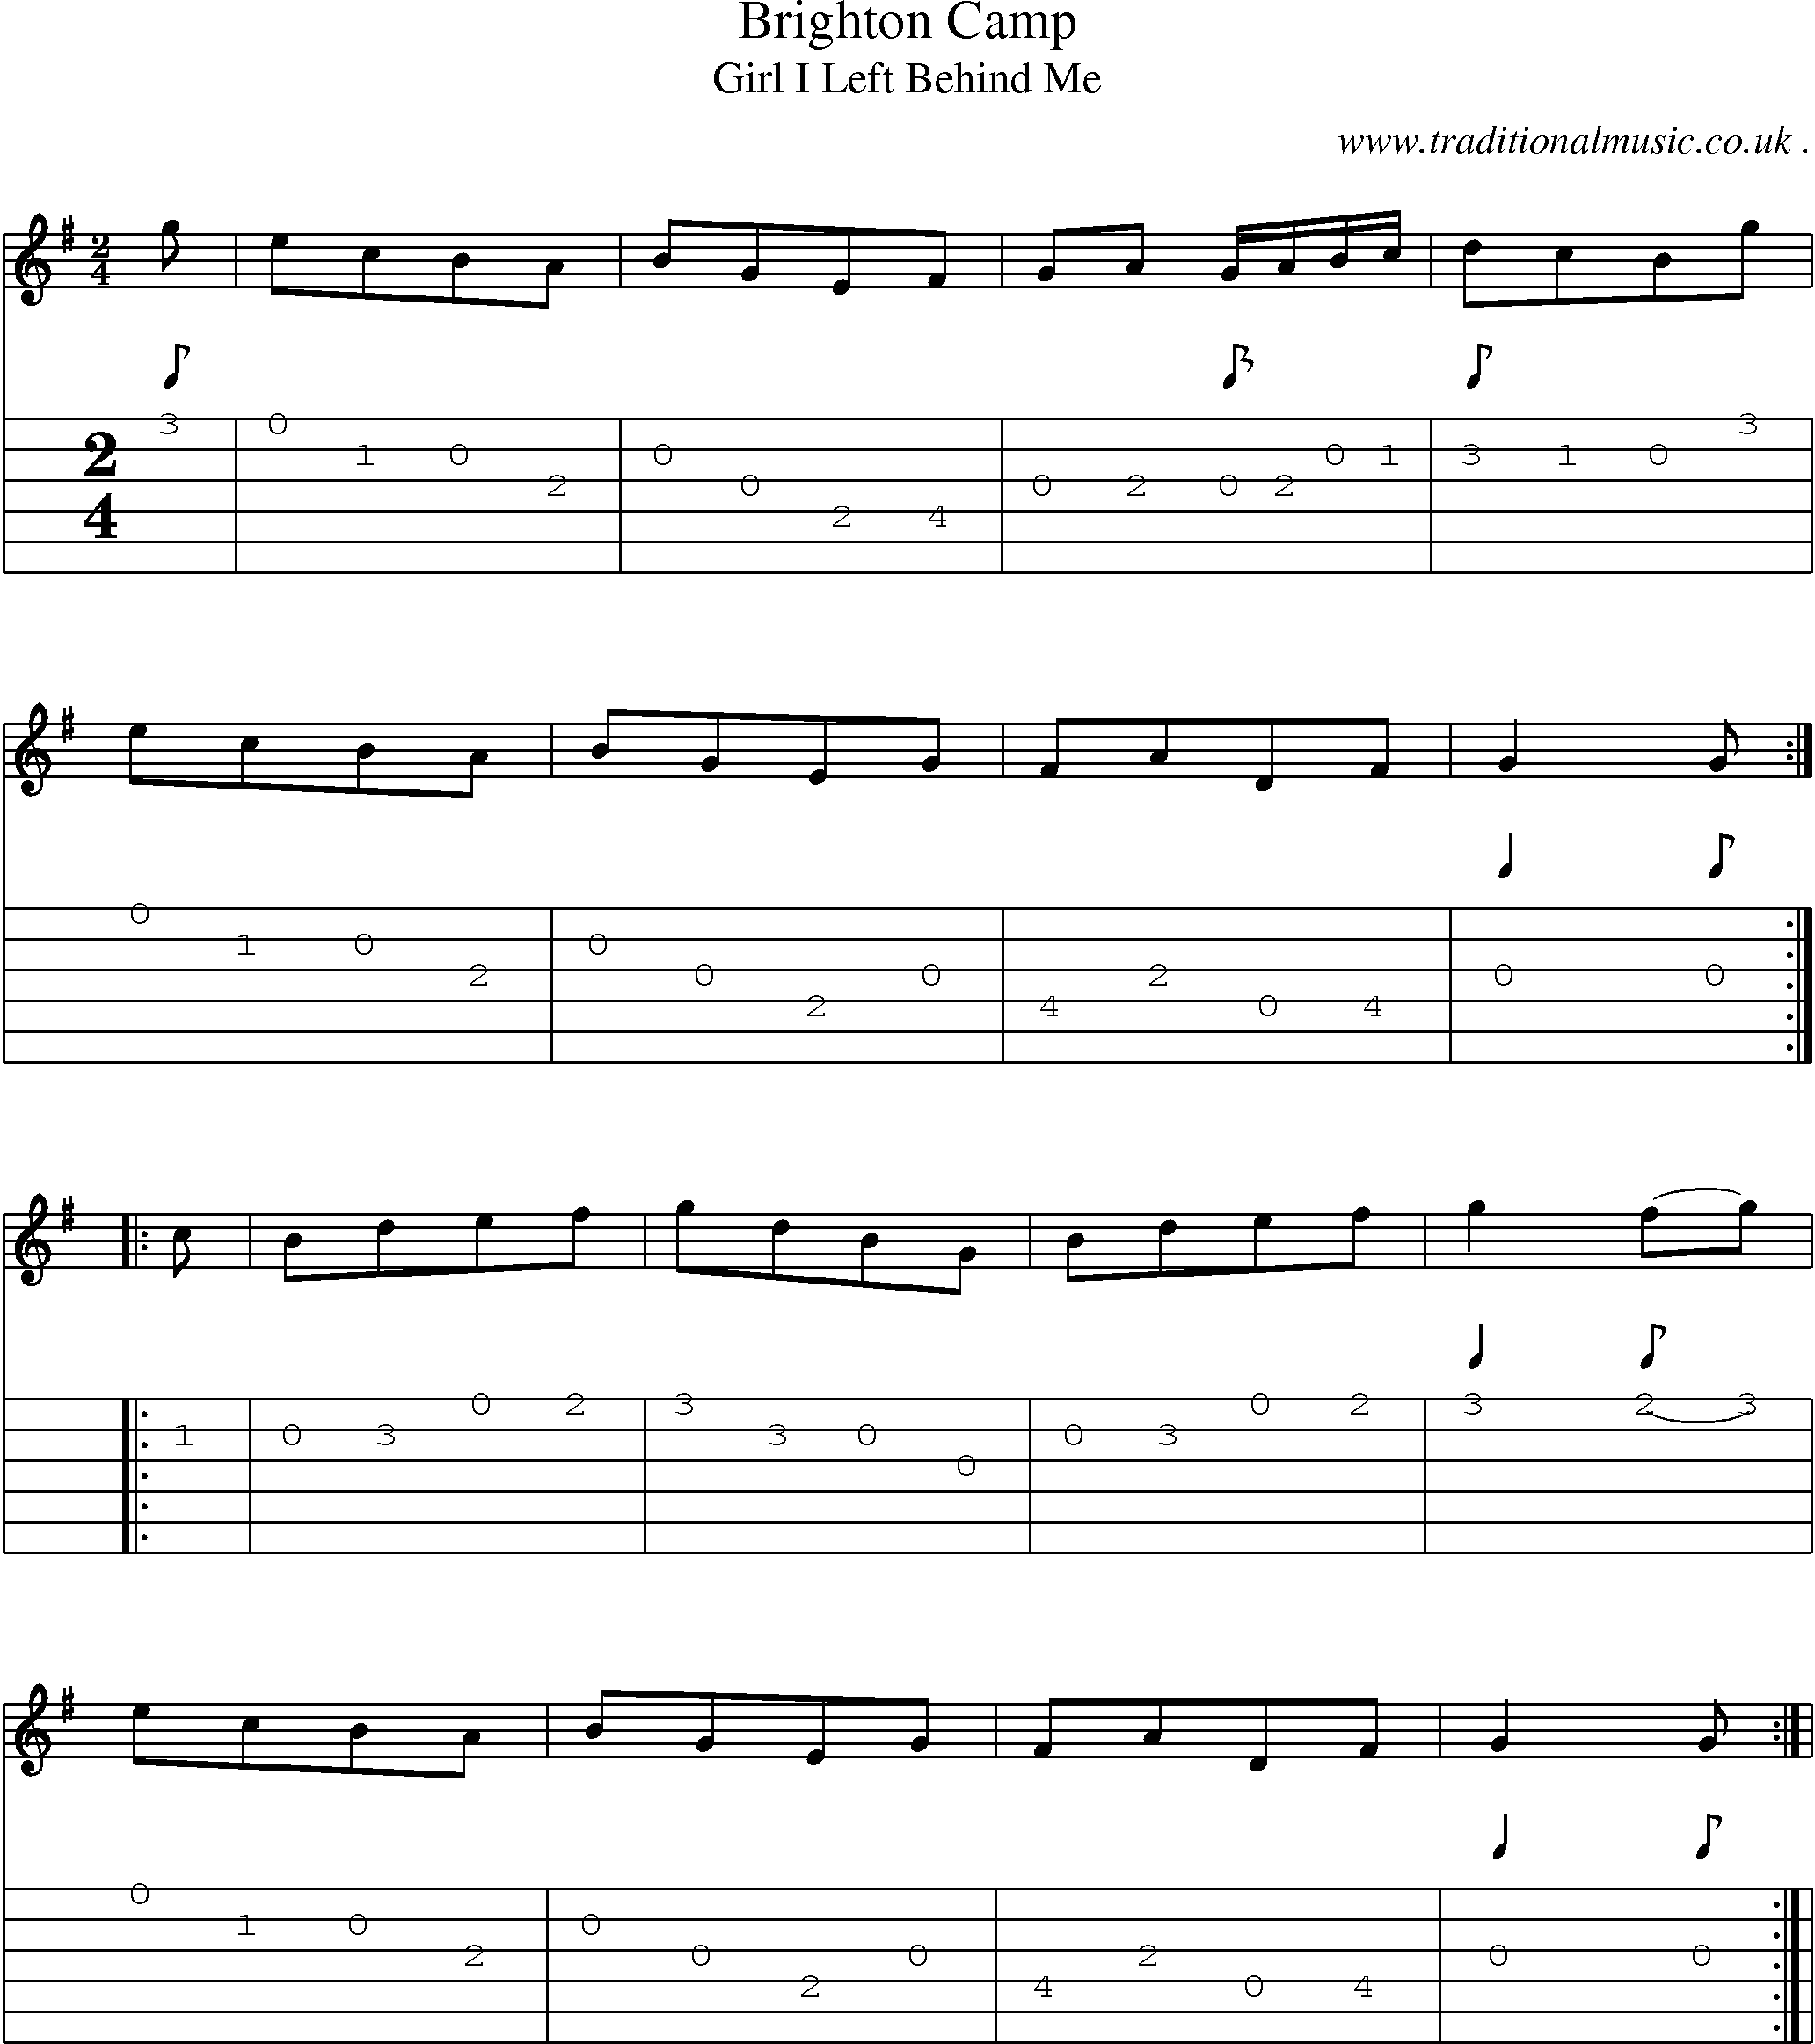 Sheet-Music and Guitar Tabs for Brighton Camp